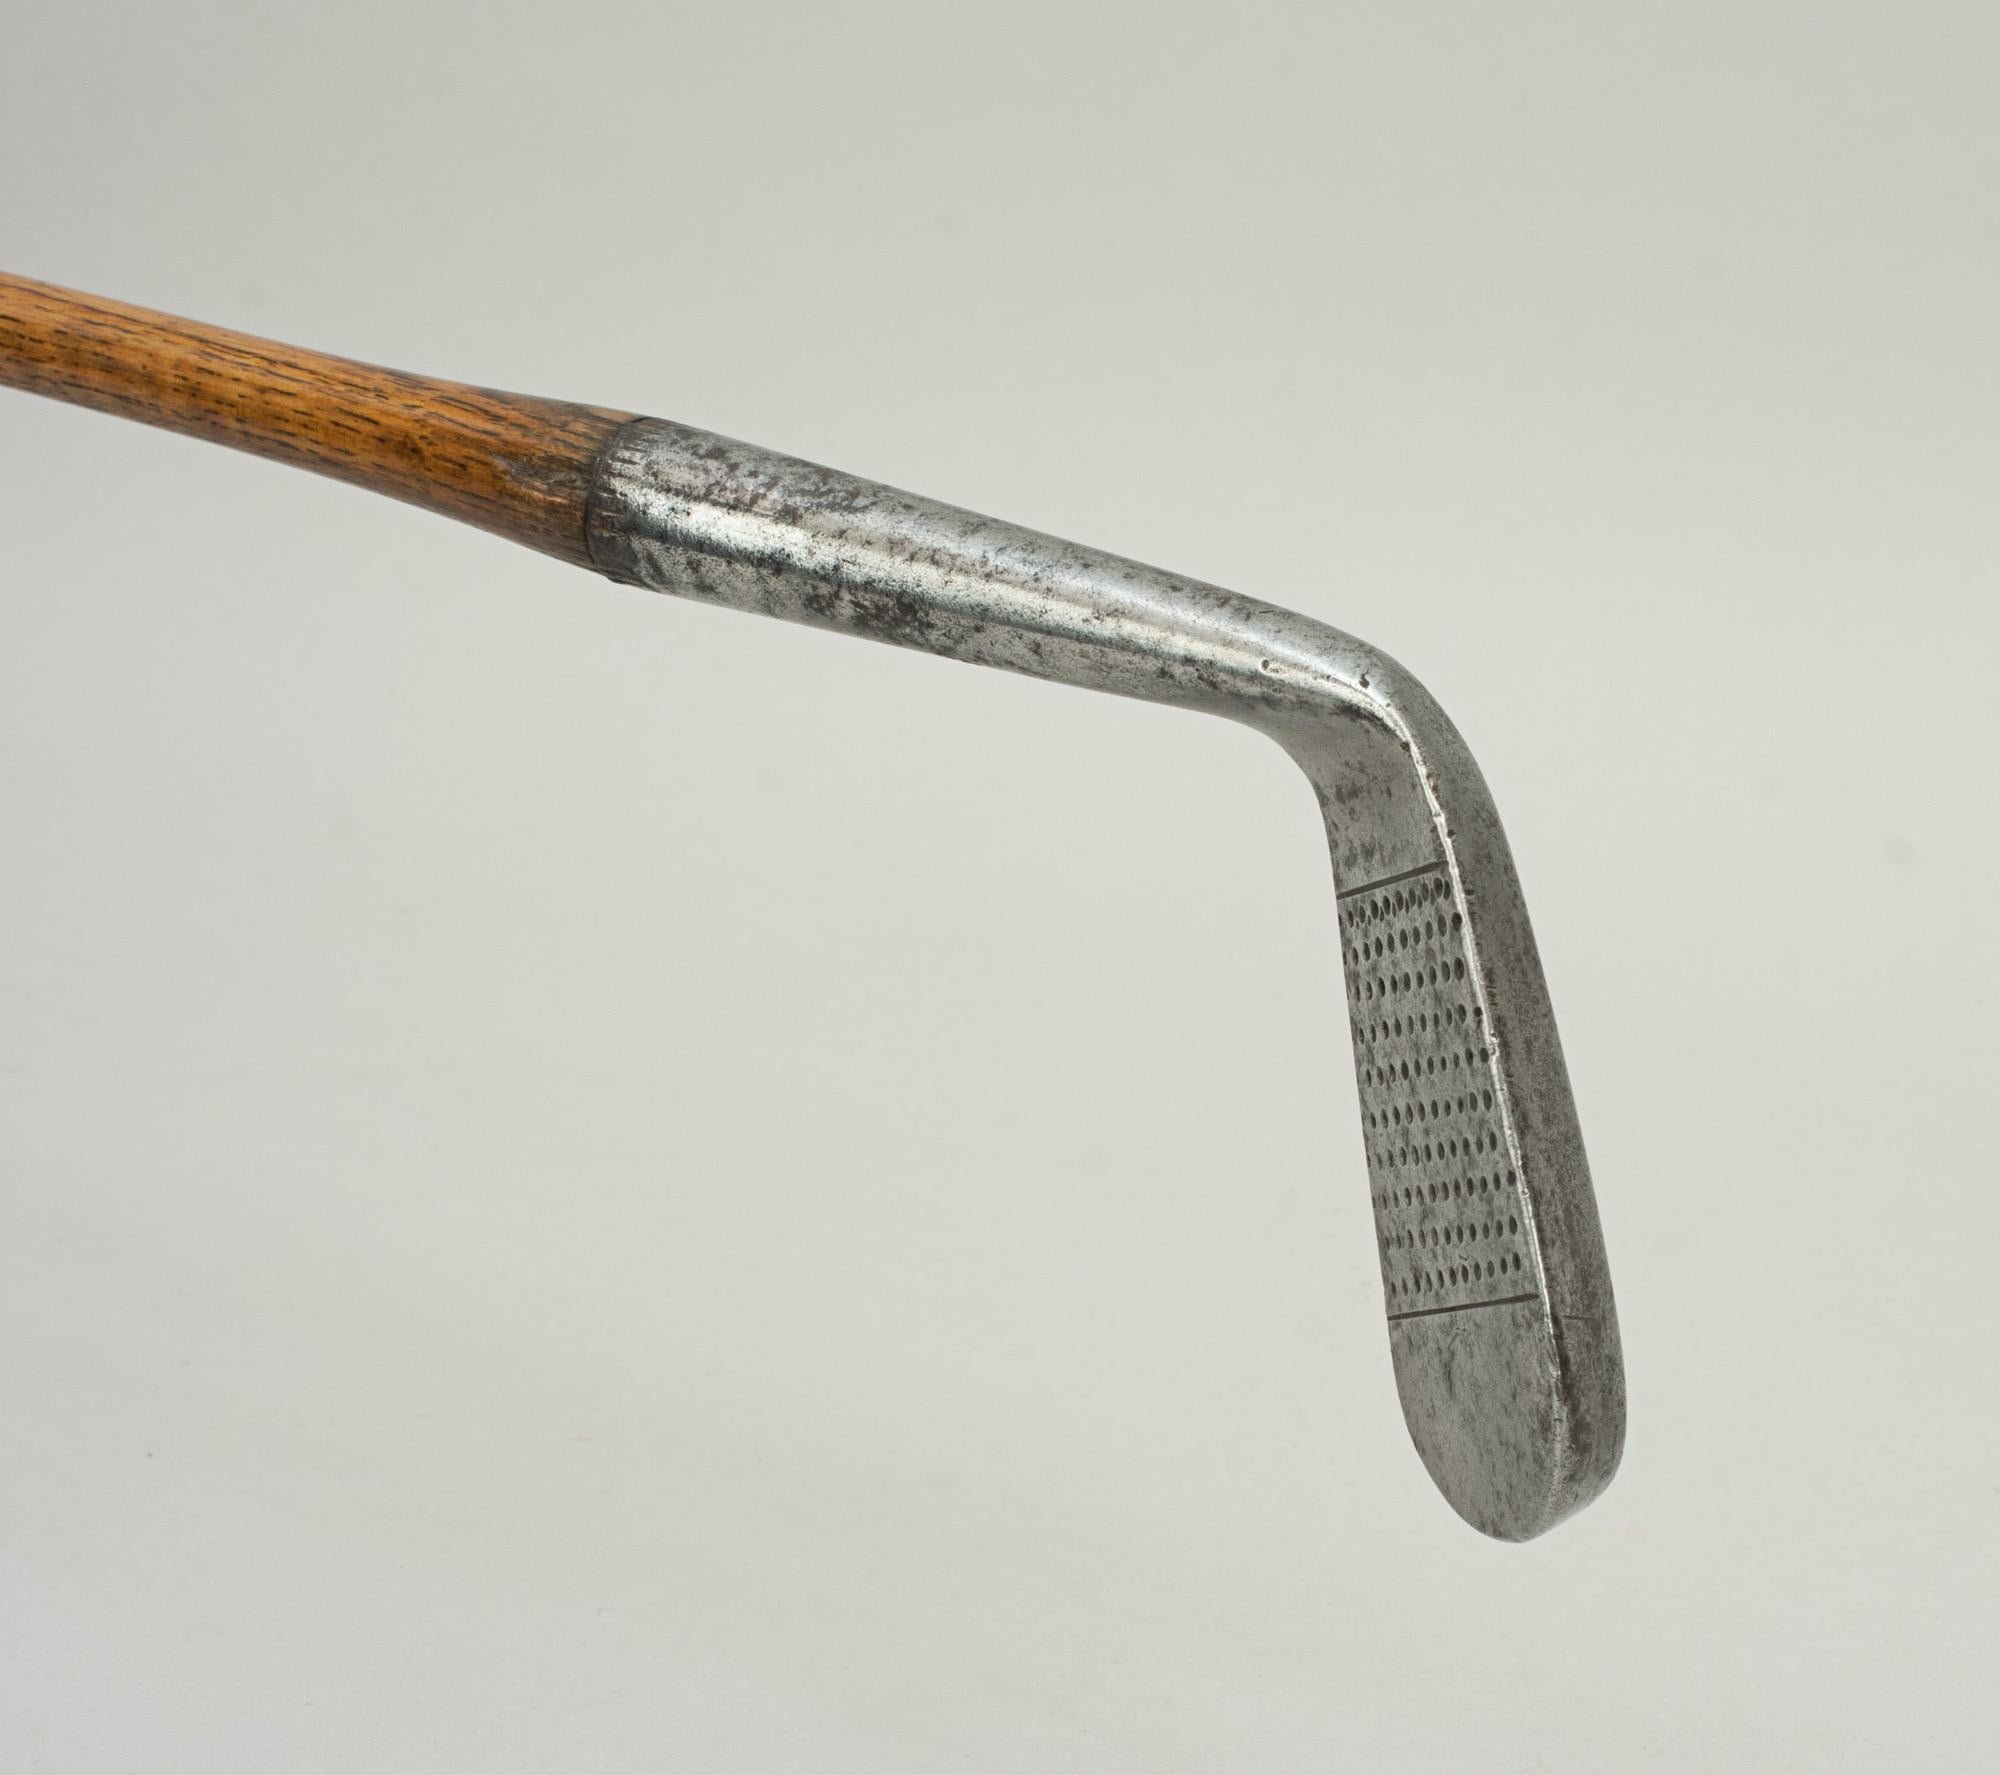 Early 20th Century Antique Hickory Golf Club, Tom Stewart Iron with Personal Inspection Mark